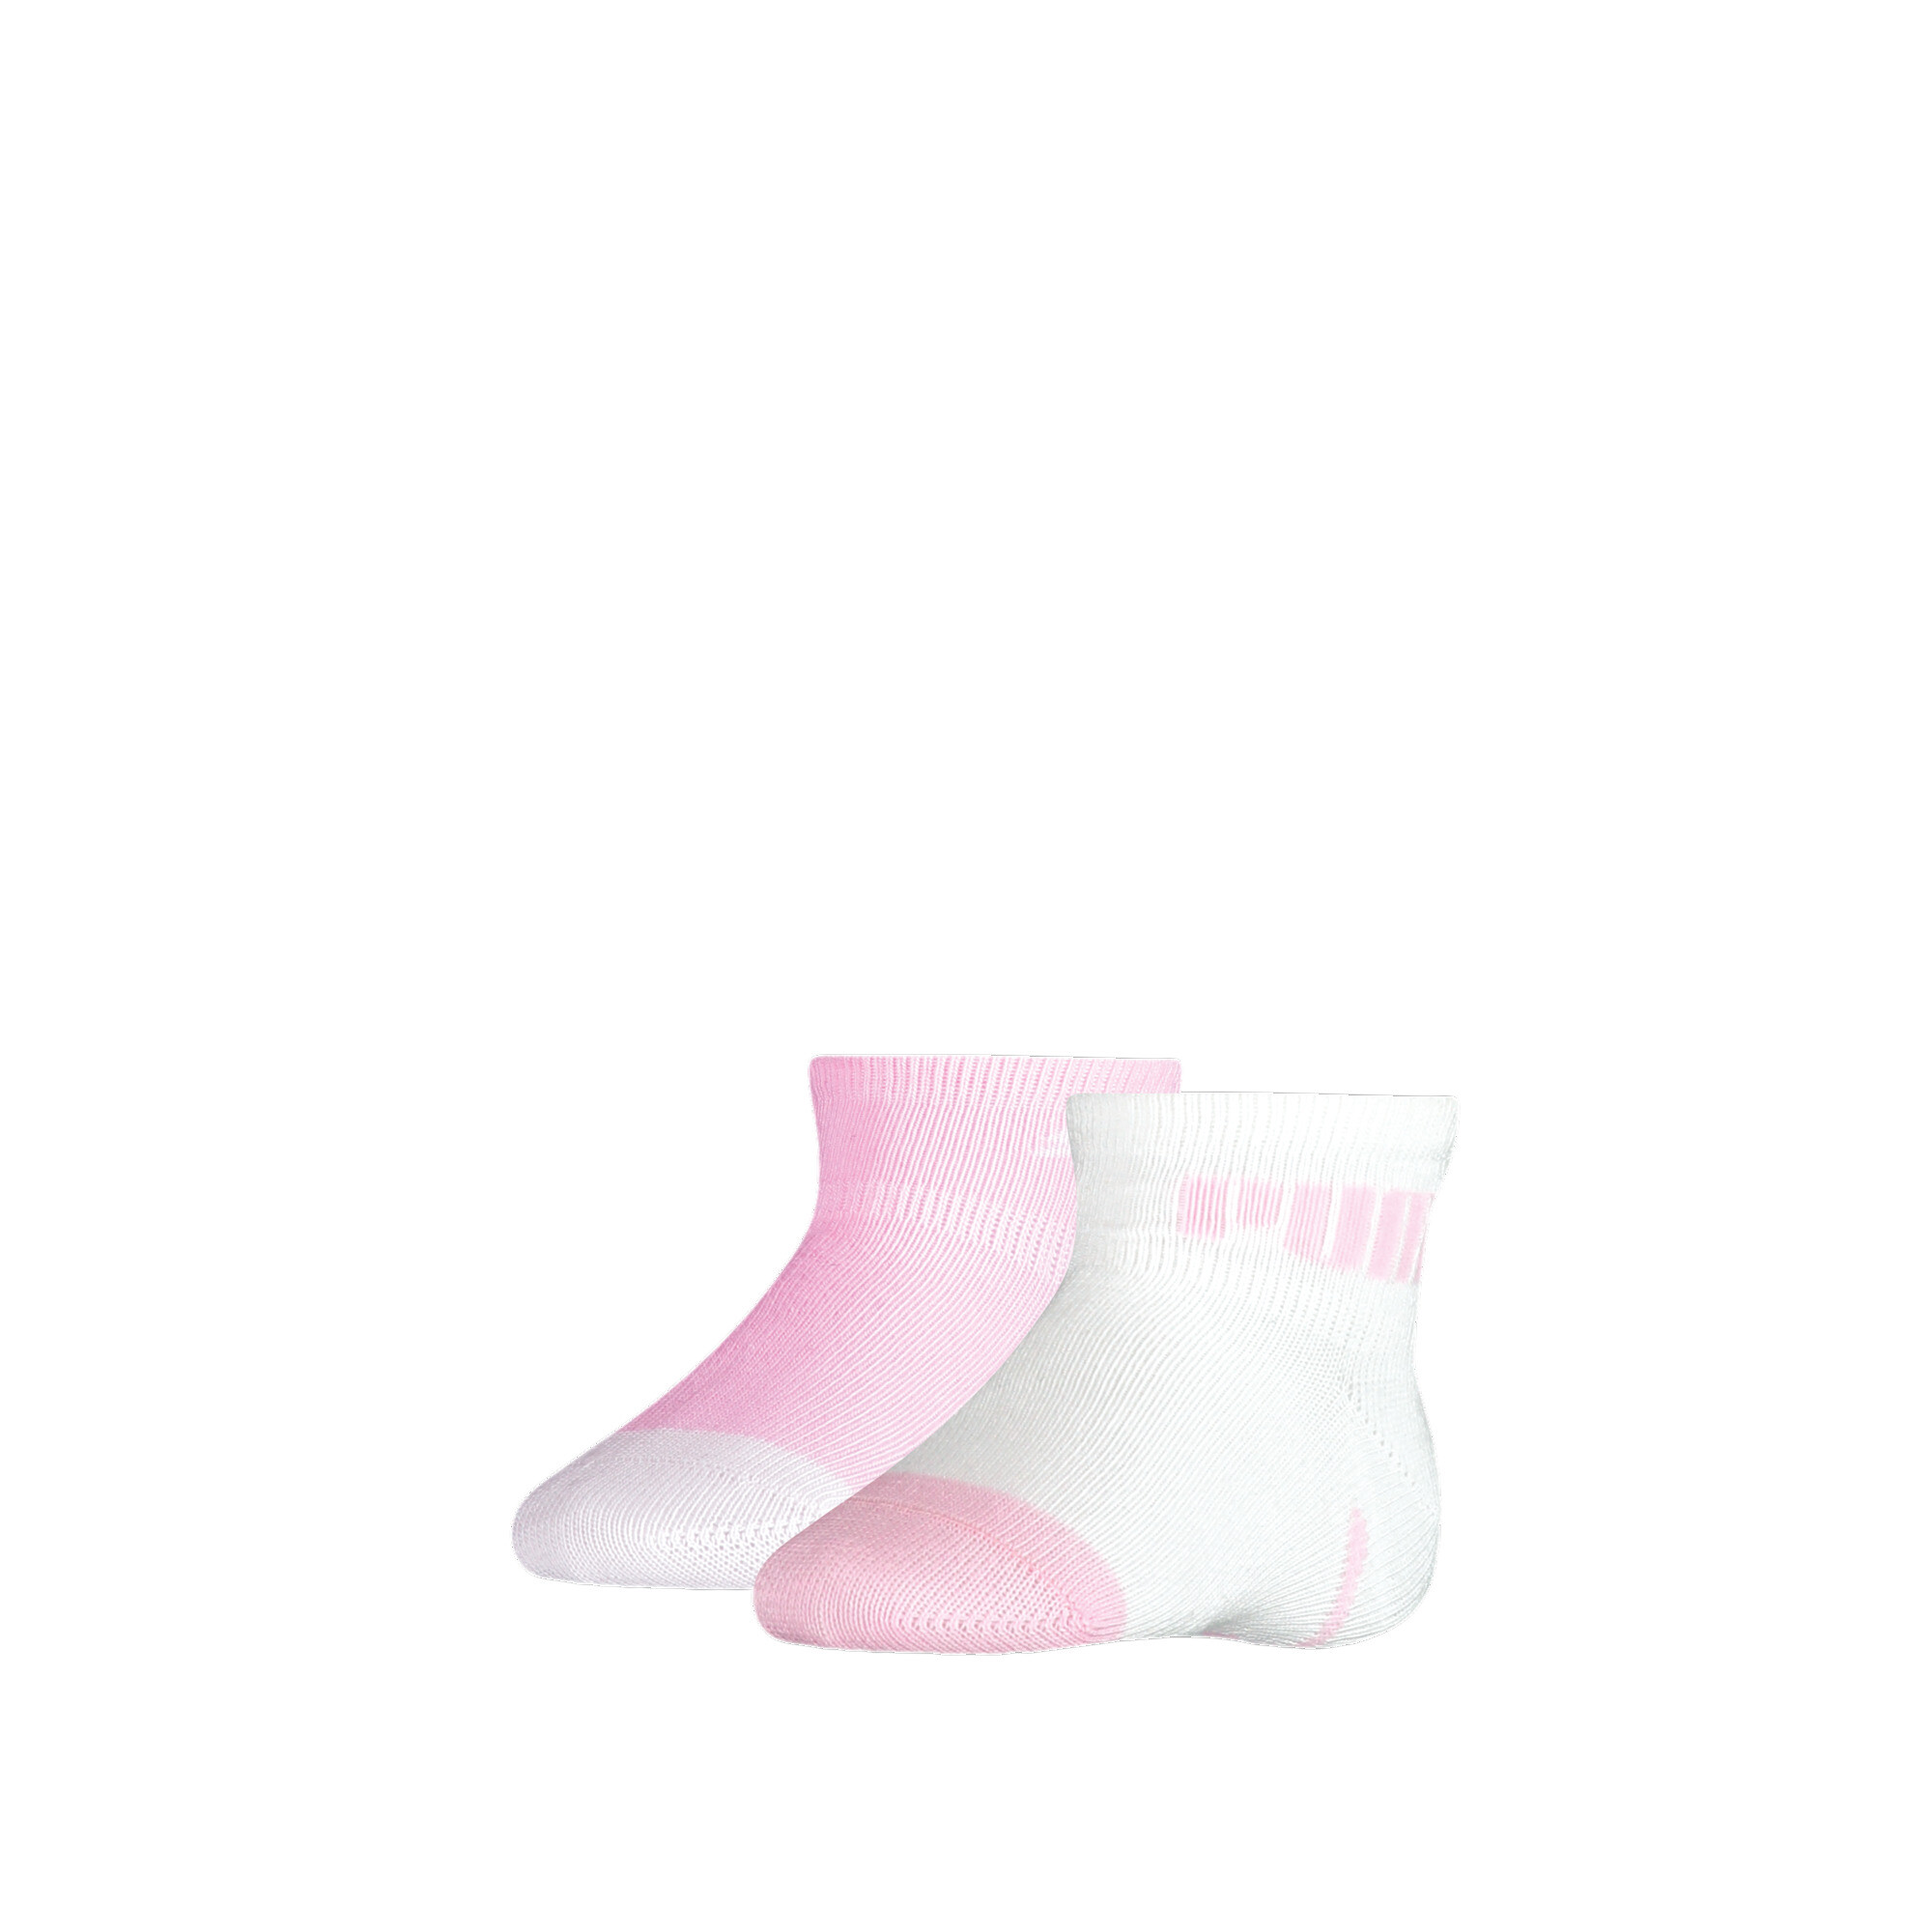 Kids' PUMA Baby Mini Cats Lifestyle Socks 2 Pack In Pink, Size 15-18